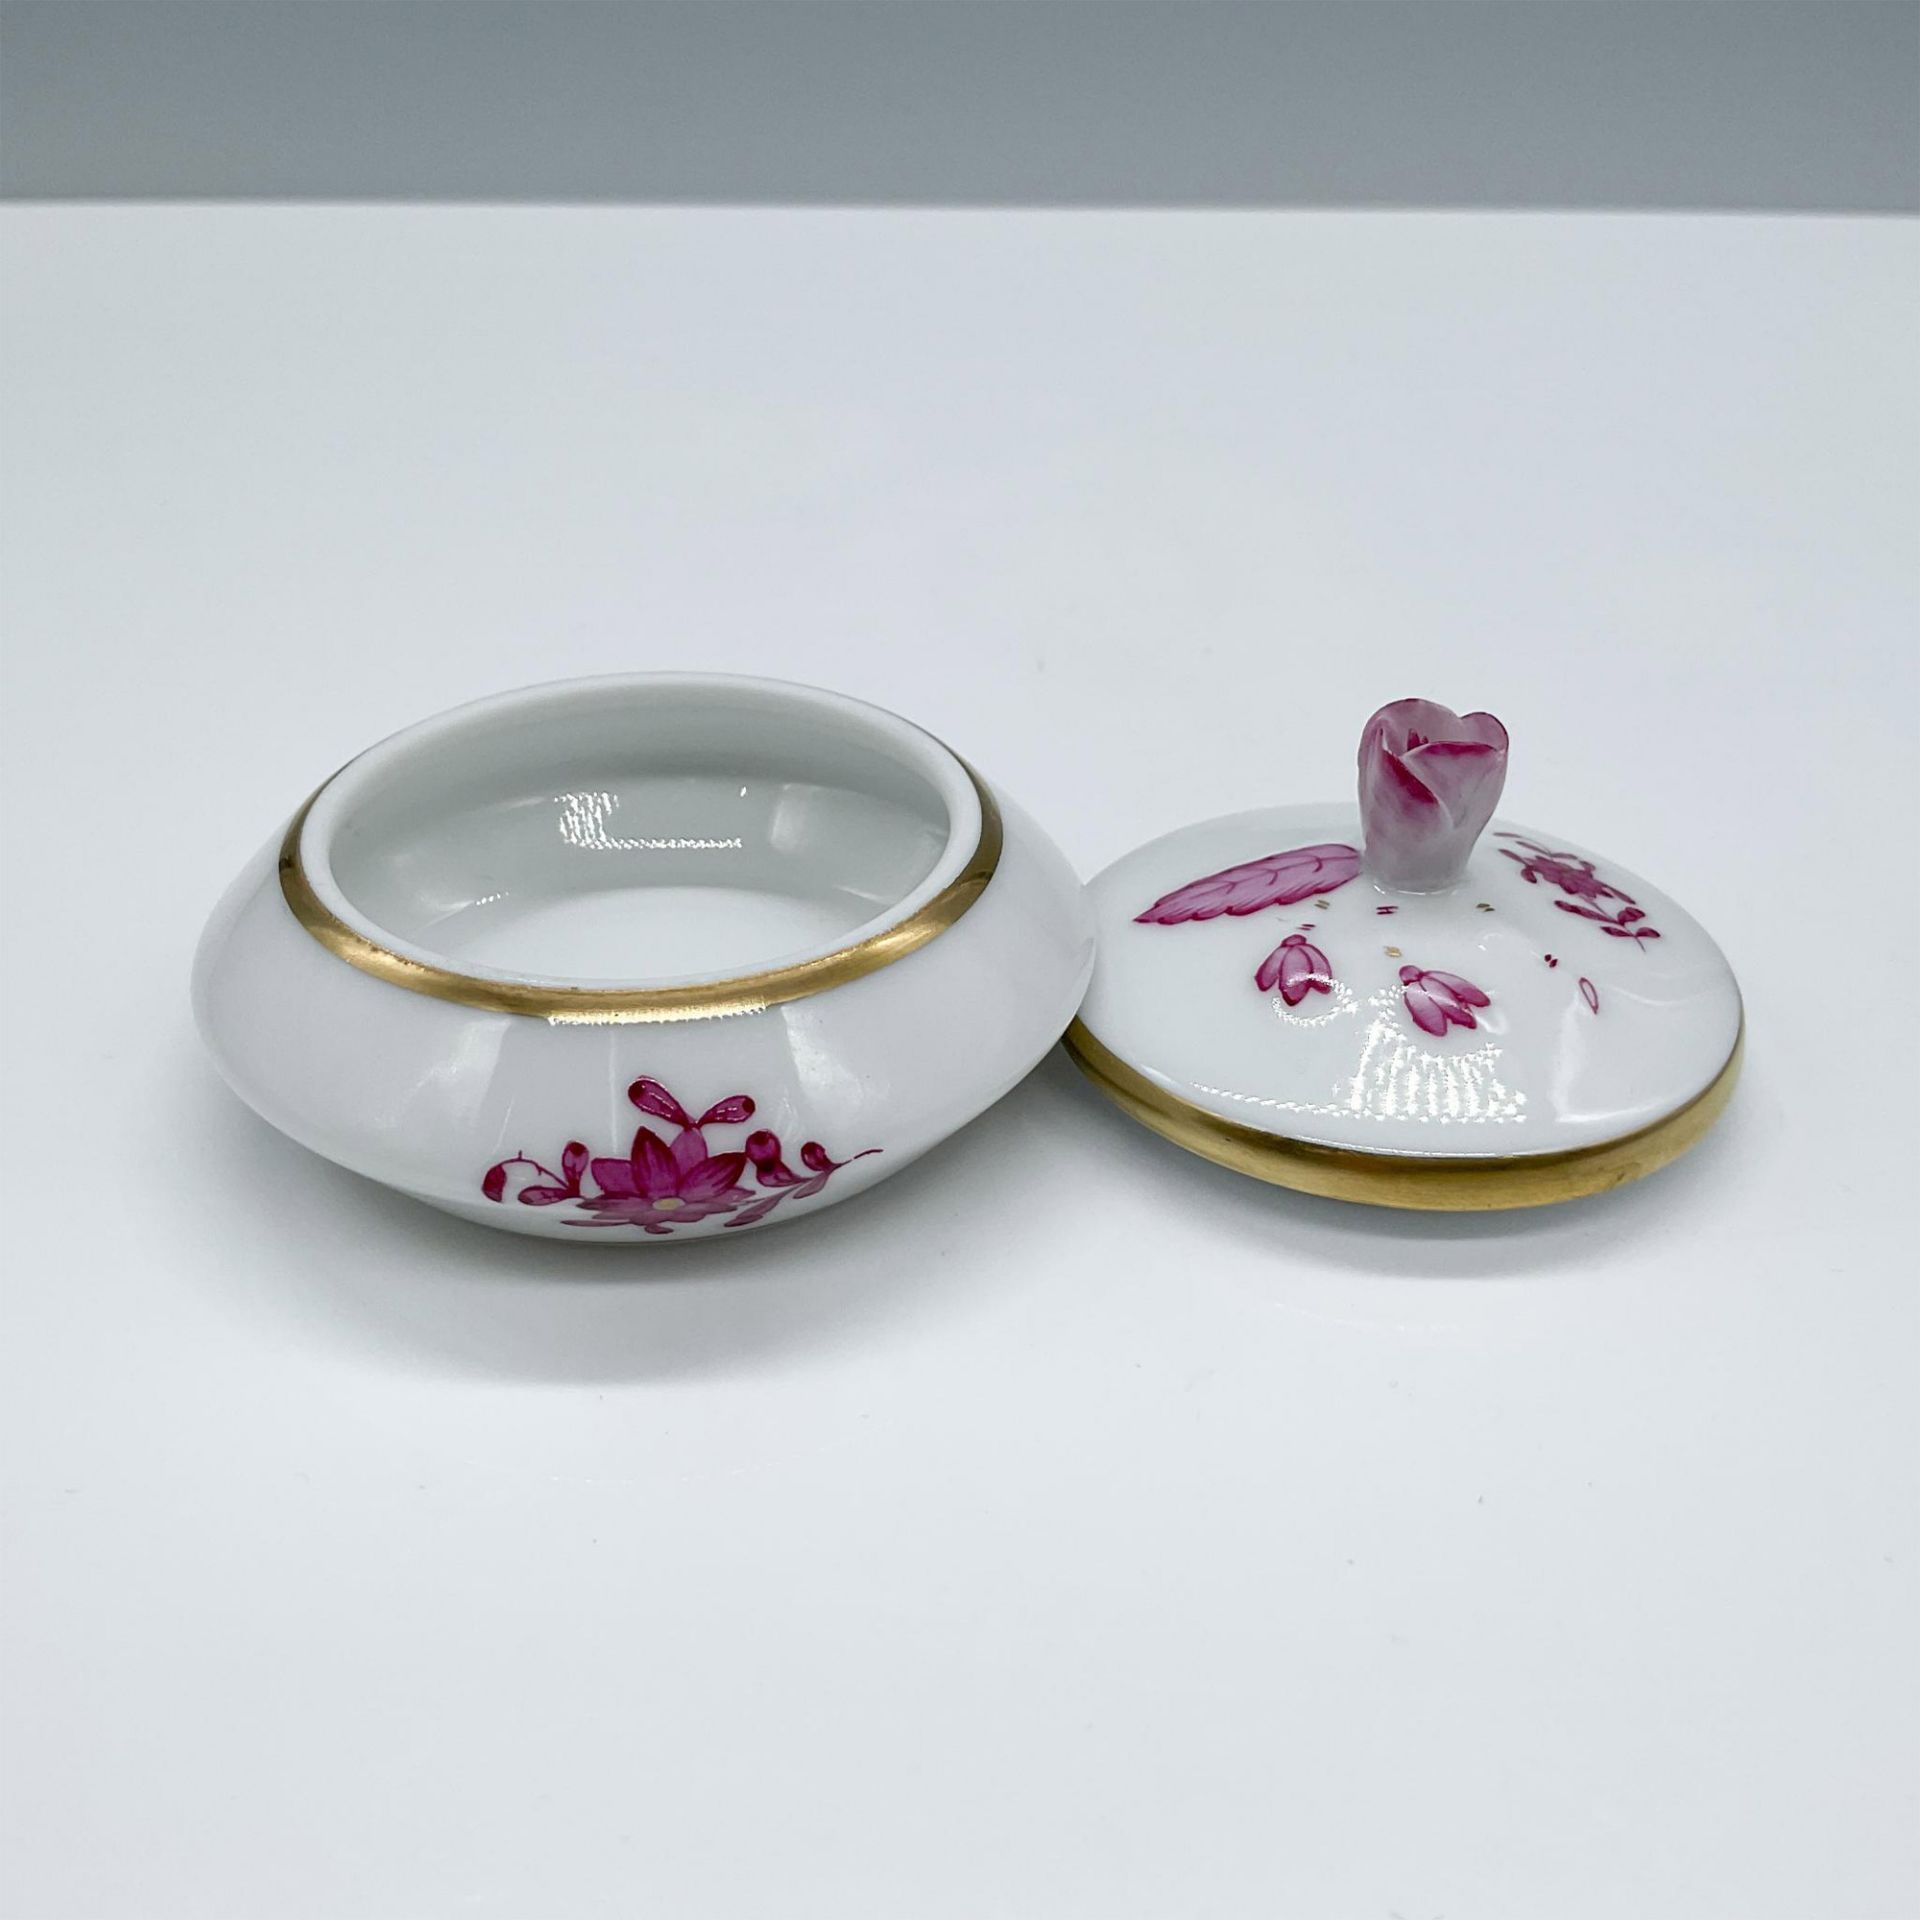 Herend Lidded Treasure Box, Rose Pink Bouquet 6027 - Image 3 of 4